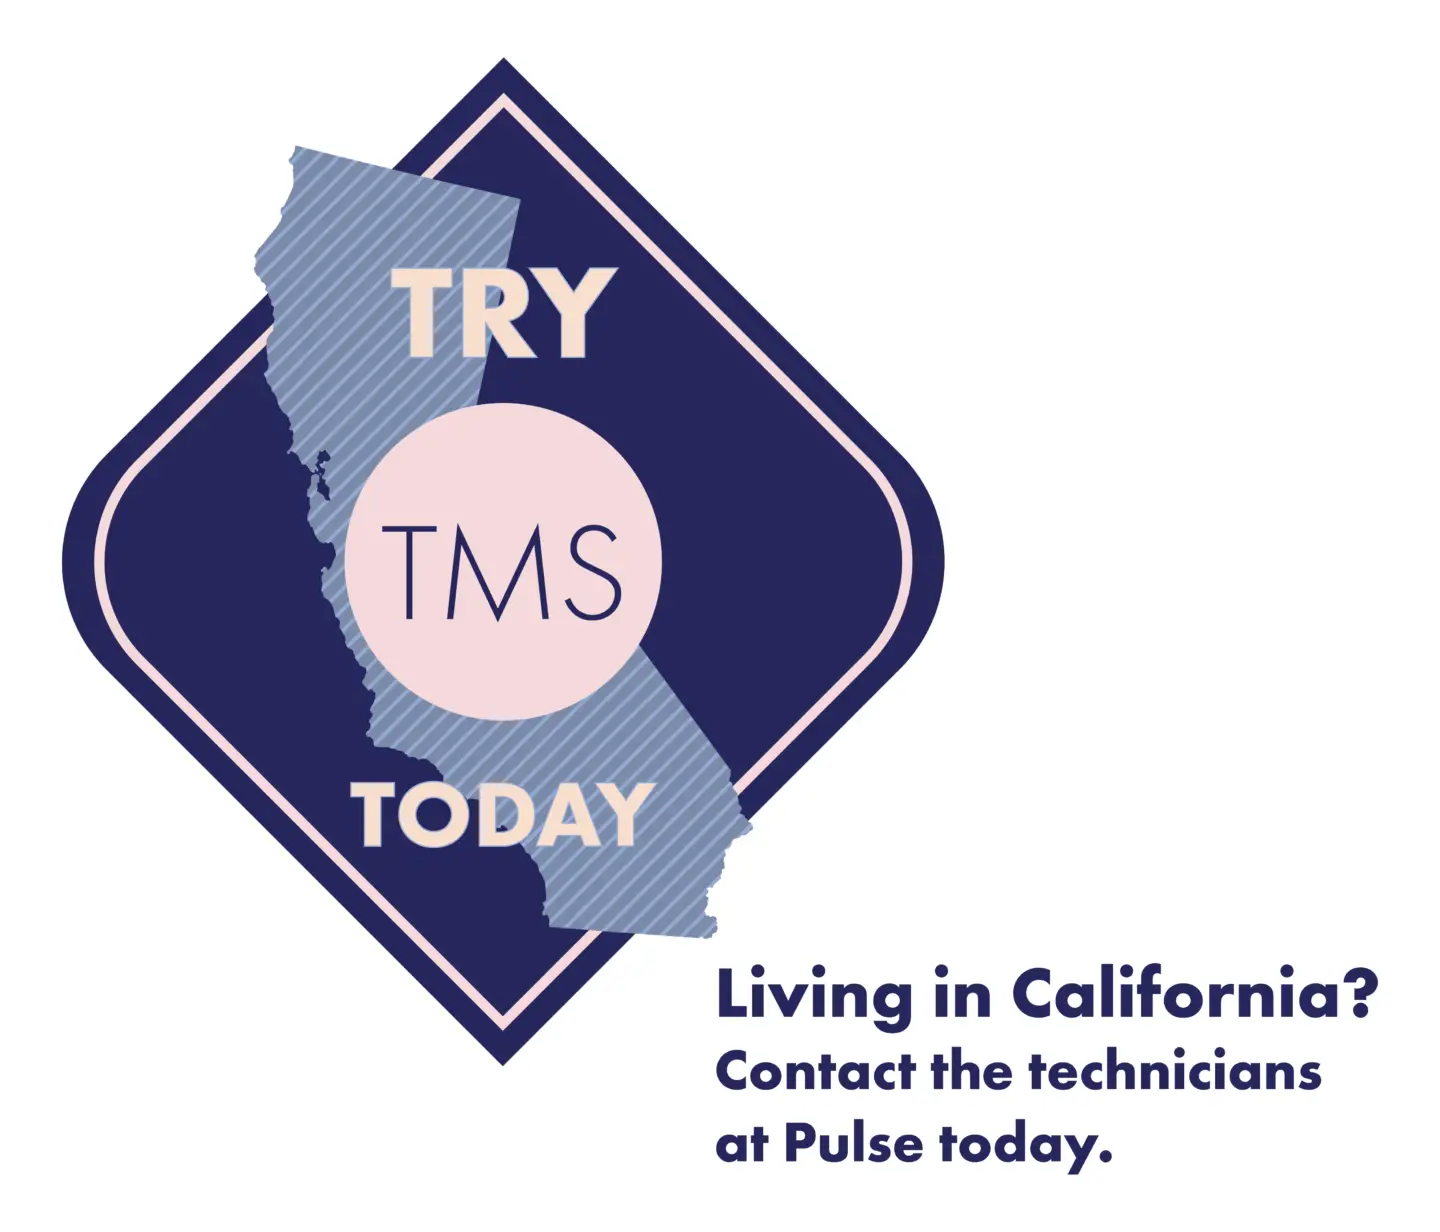 A Guide to the History of TMS (Transcranial Magnetic Stimulation)